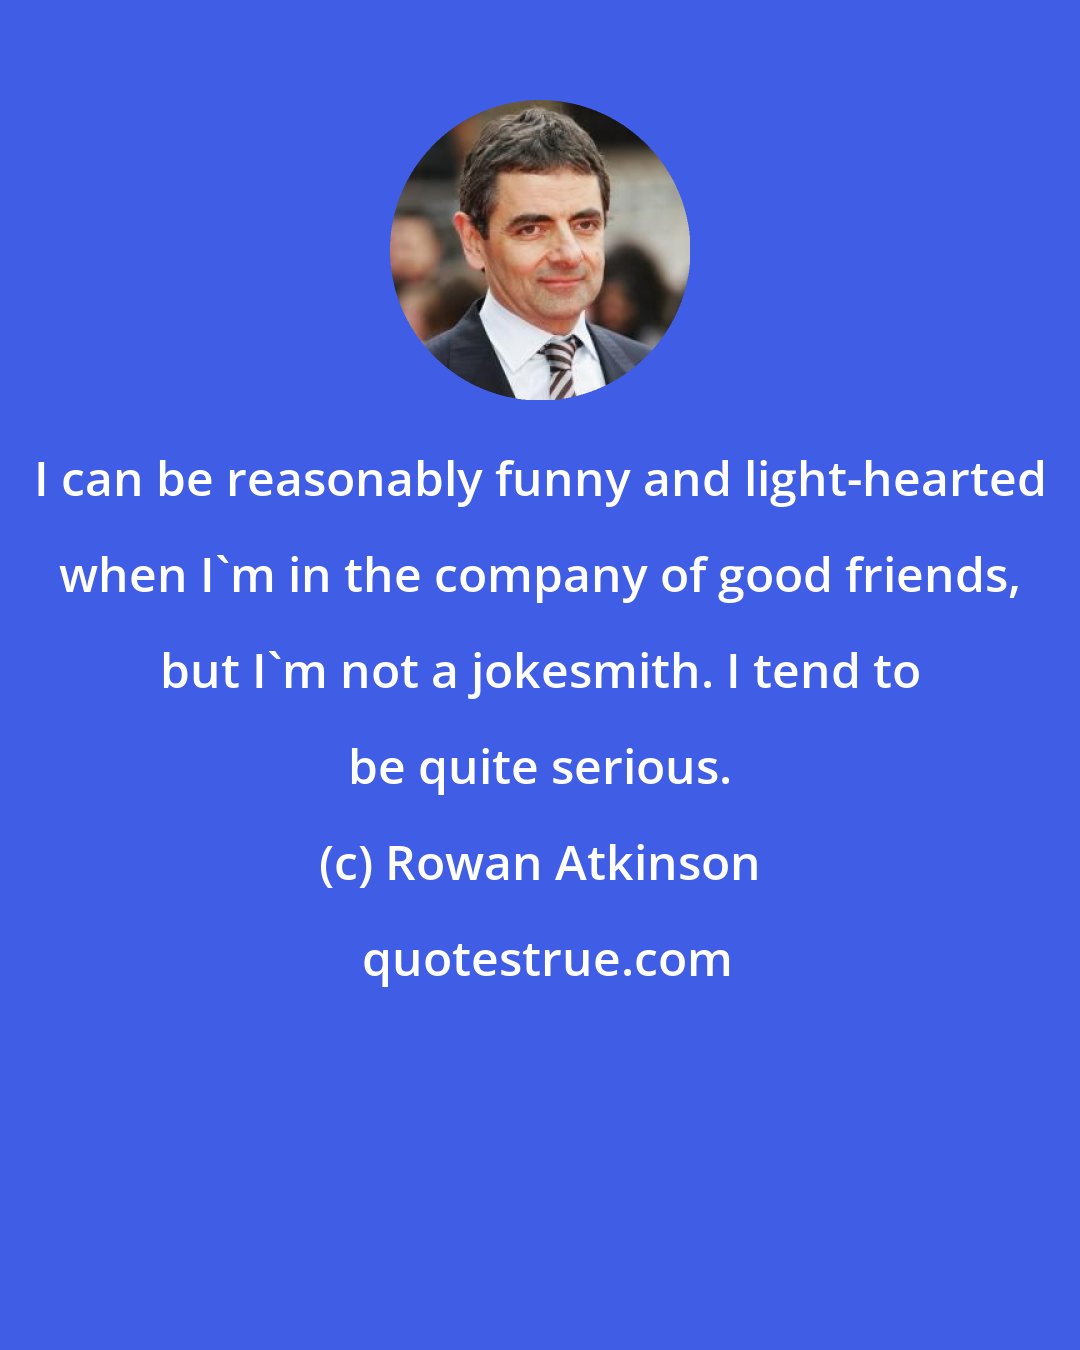 Rowan Atkinson: I can be reasonably funny and light-hearted when I'm in the company of good friends, but I'm not a jokesmith. I tend to be quite serious.